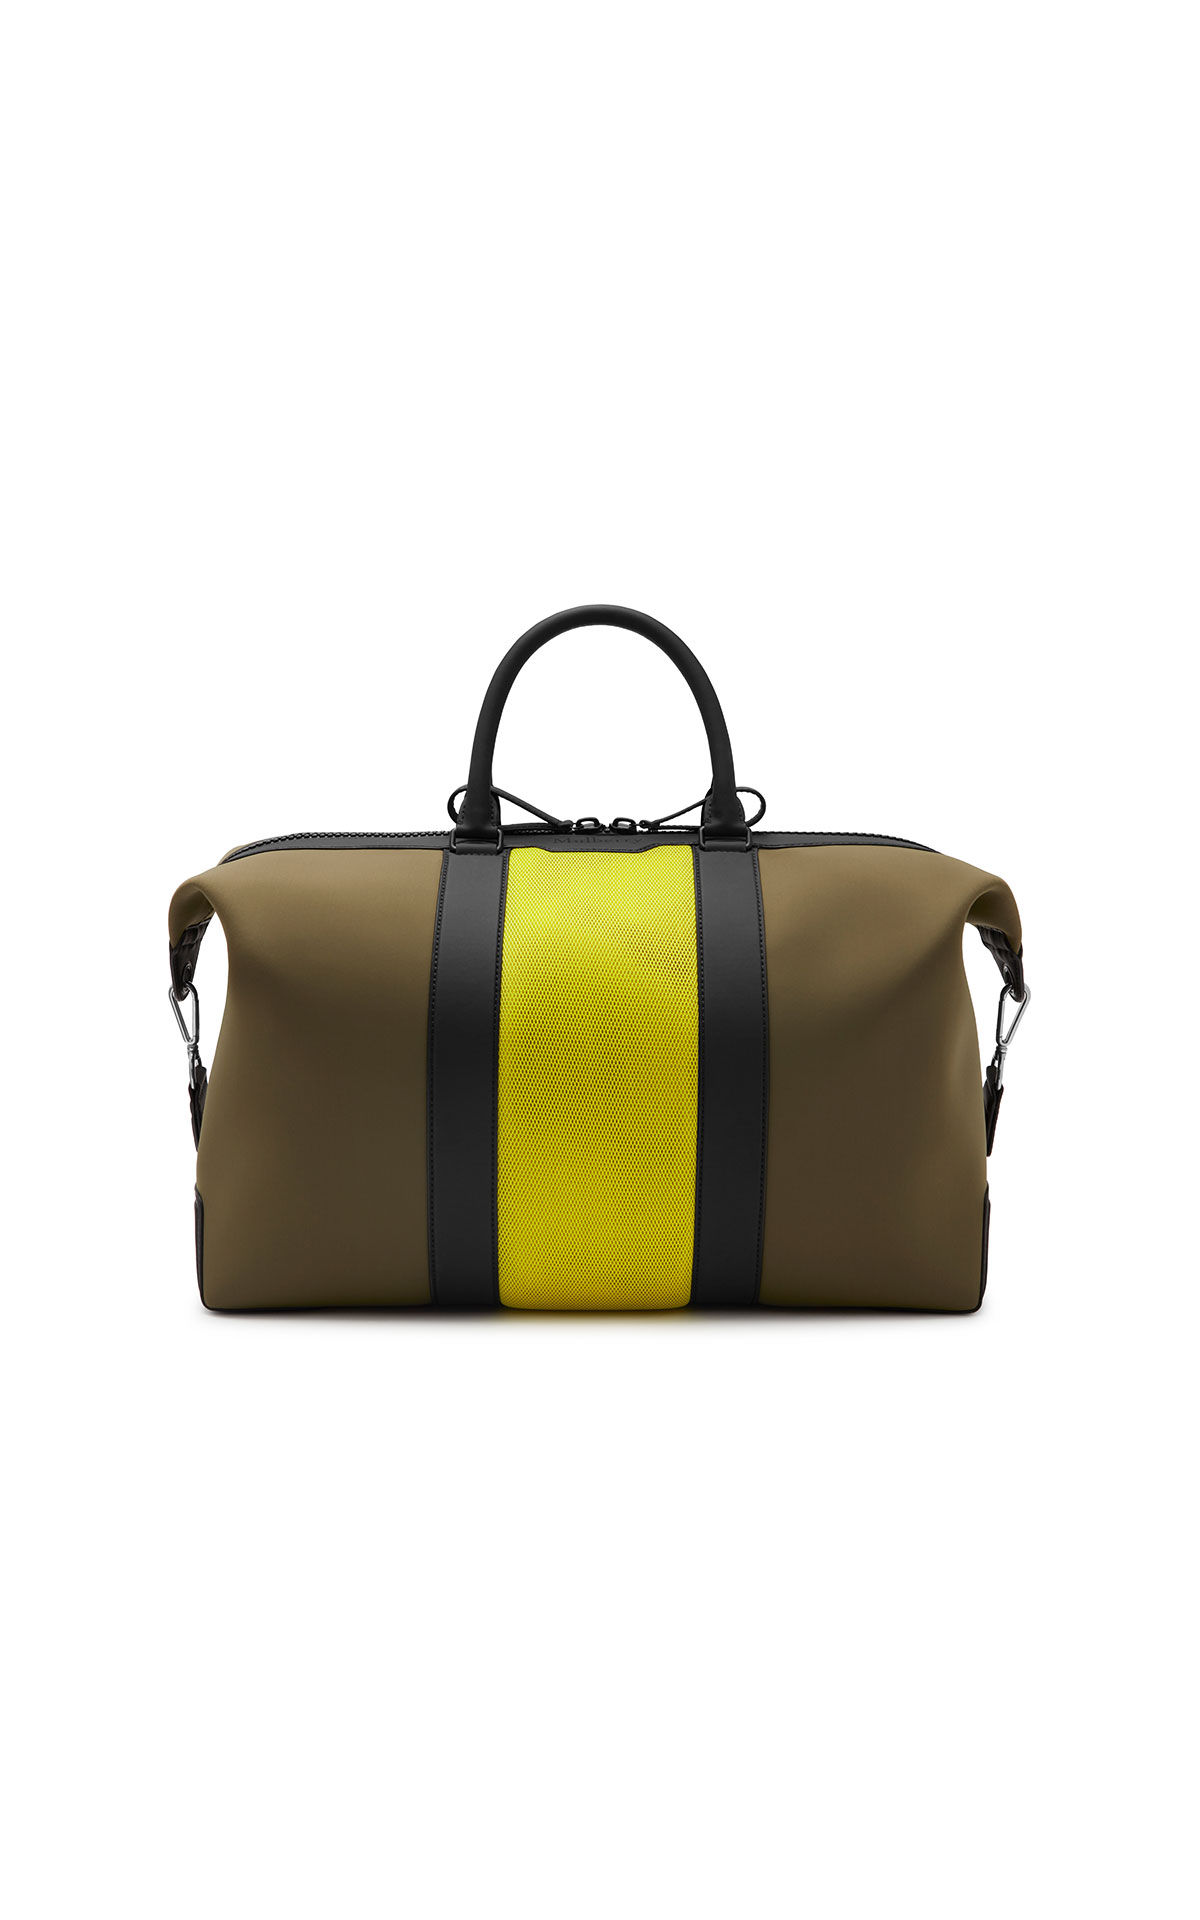 Mulberry Striped weekender bag from Bicester Village